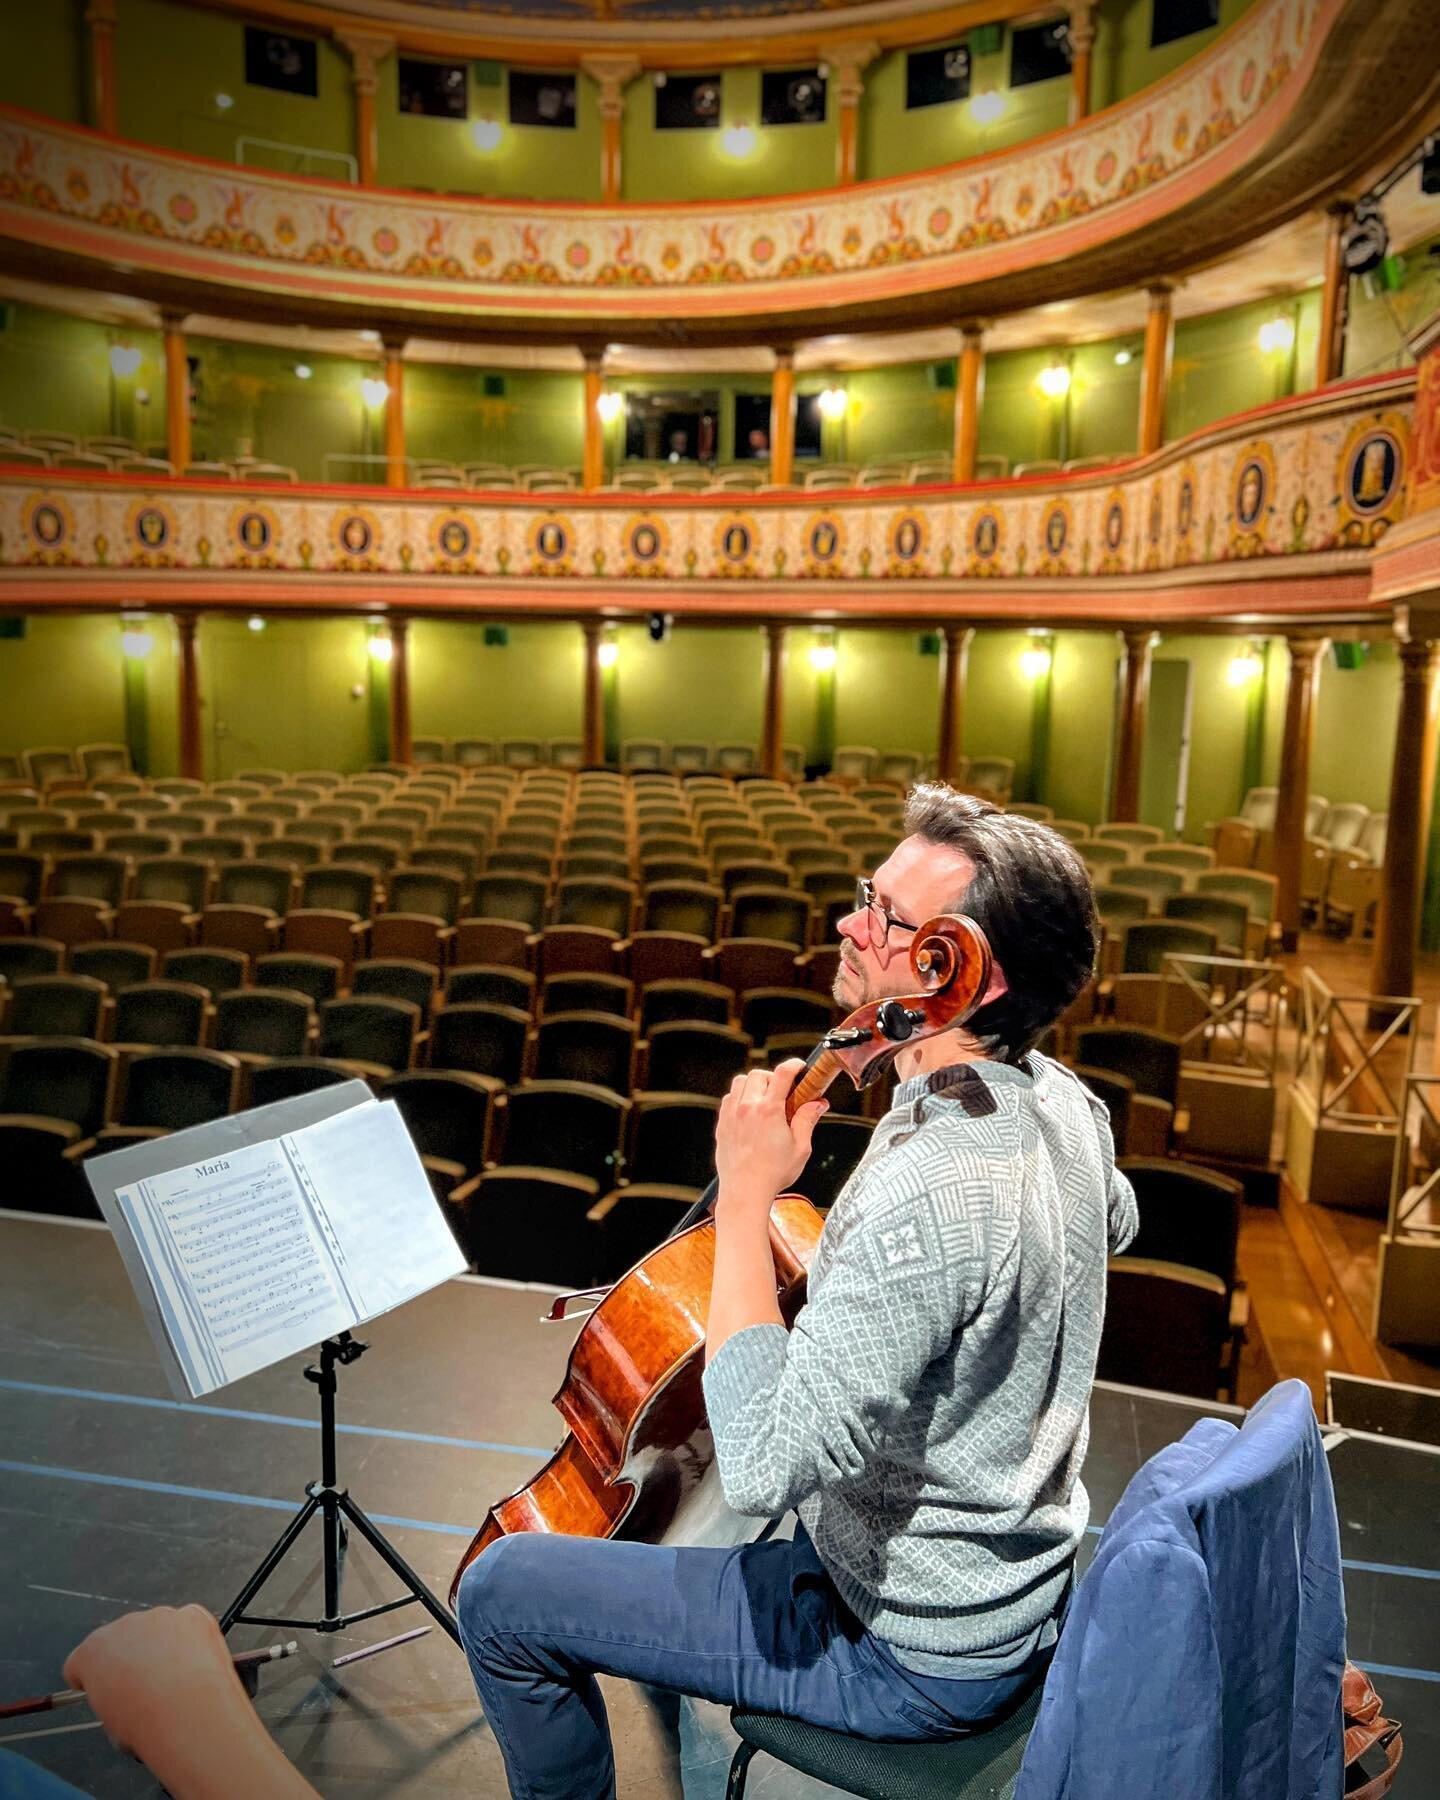 Nice hall! 🤩🤩🤩
@wilhelmatheater yesterday with AchtCelli 🔥
📸 @katharina_weigert 
.
.
.
.
.
.
.
Looking for a master class in summer?
.
May 4th-7th in the Netherlands. With a lot of chamber music with the teachers.
.
July 10th-17h, Dolomites, Ita